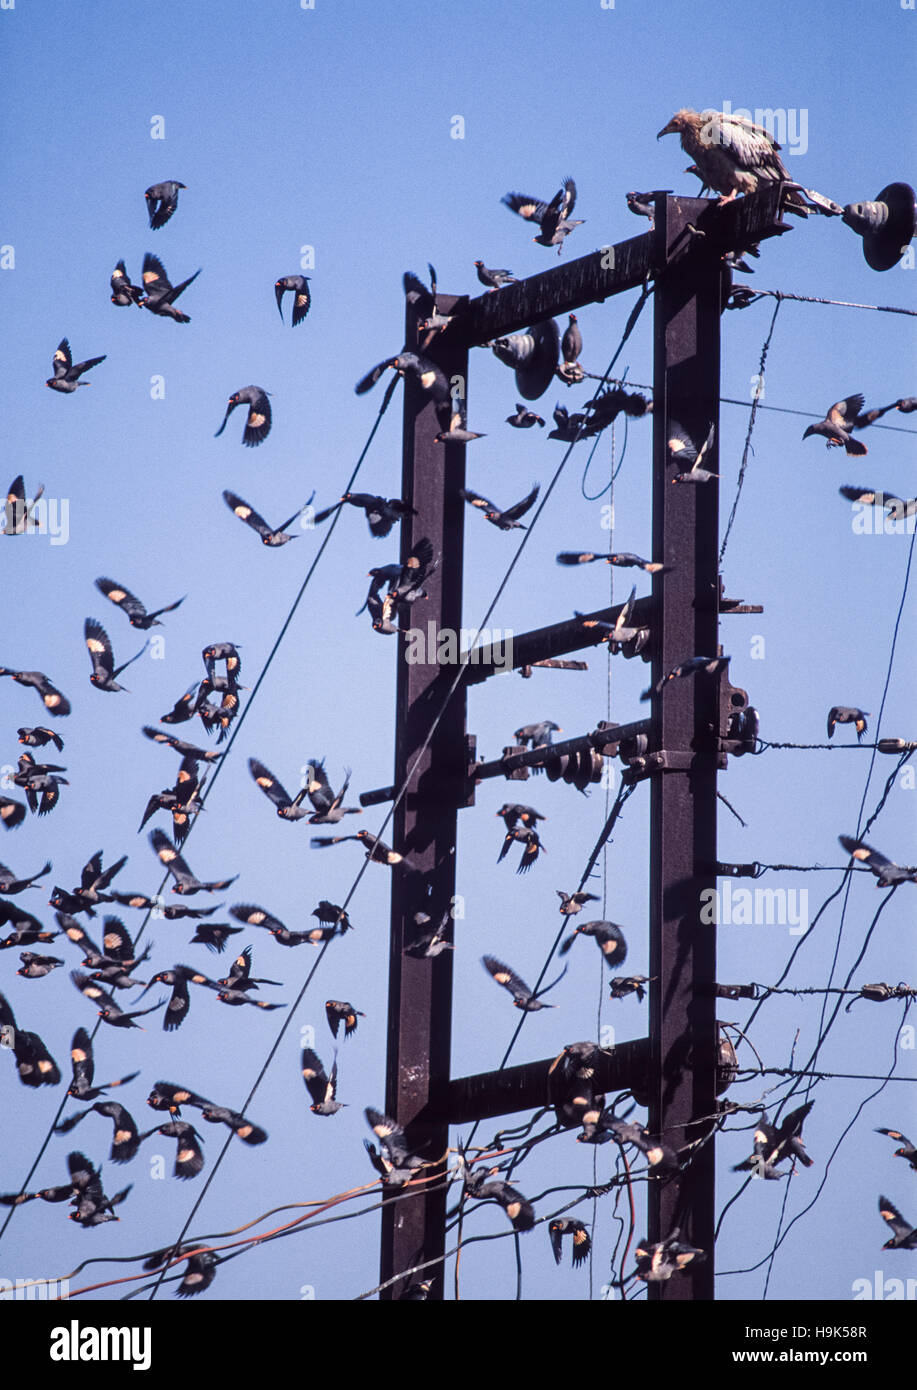 Bank Myna,(Acridotheres ginginianus), flock flying away from an Egyptian vulture landed on an electrical pylon,Rajasthan, India Stock Photo